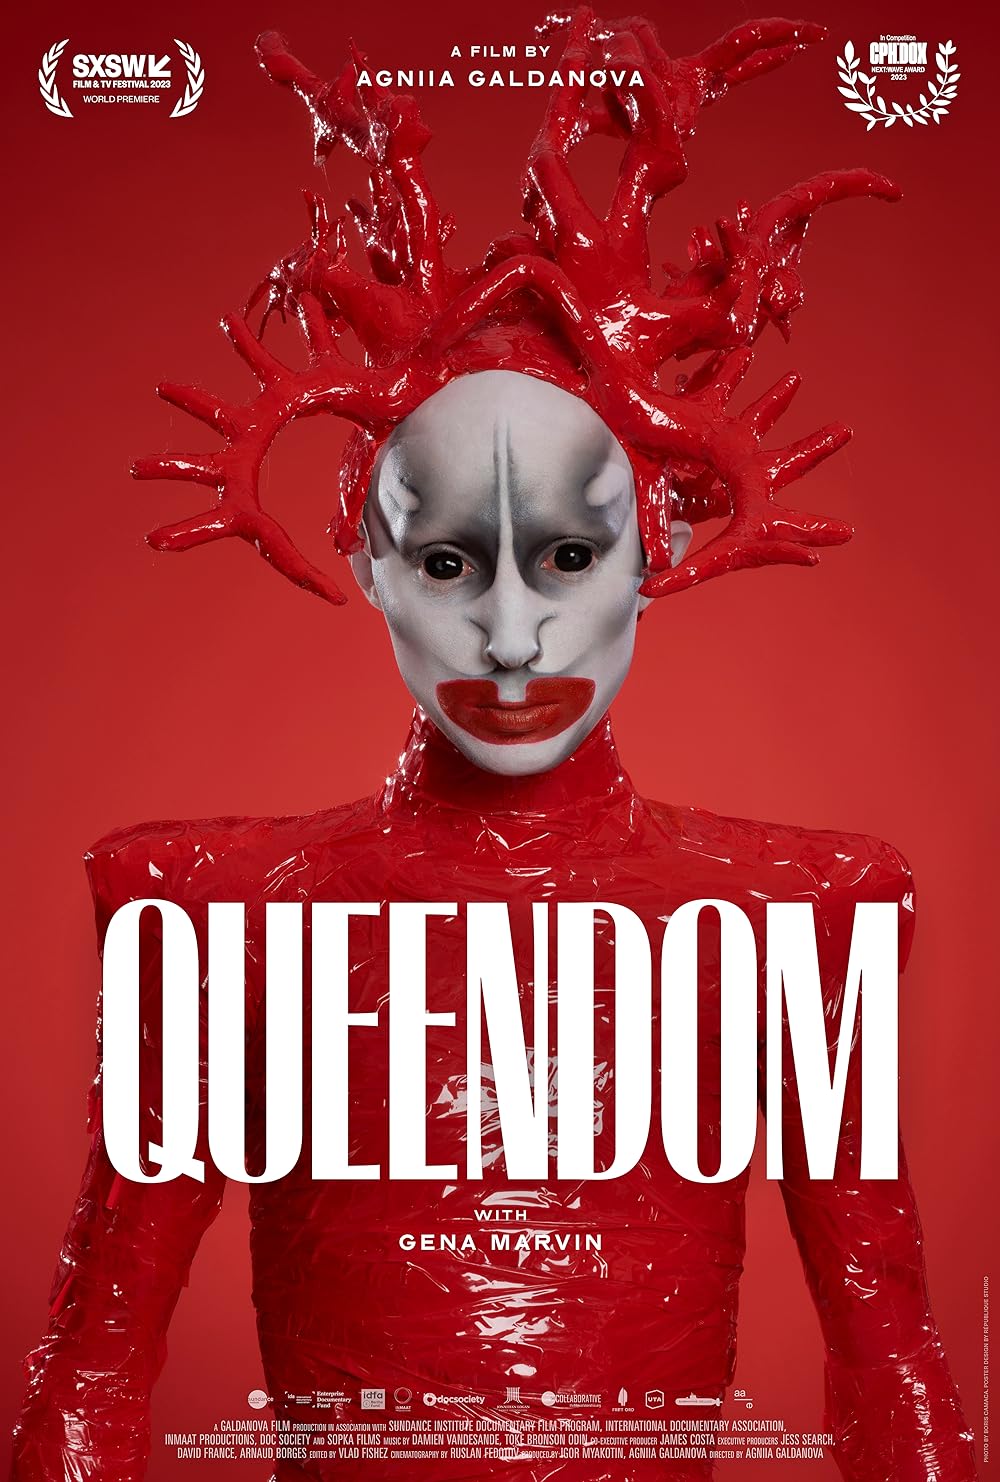 person dressed in red with white striking face makeup with red background. White text overlayed with 'queendom'